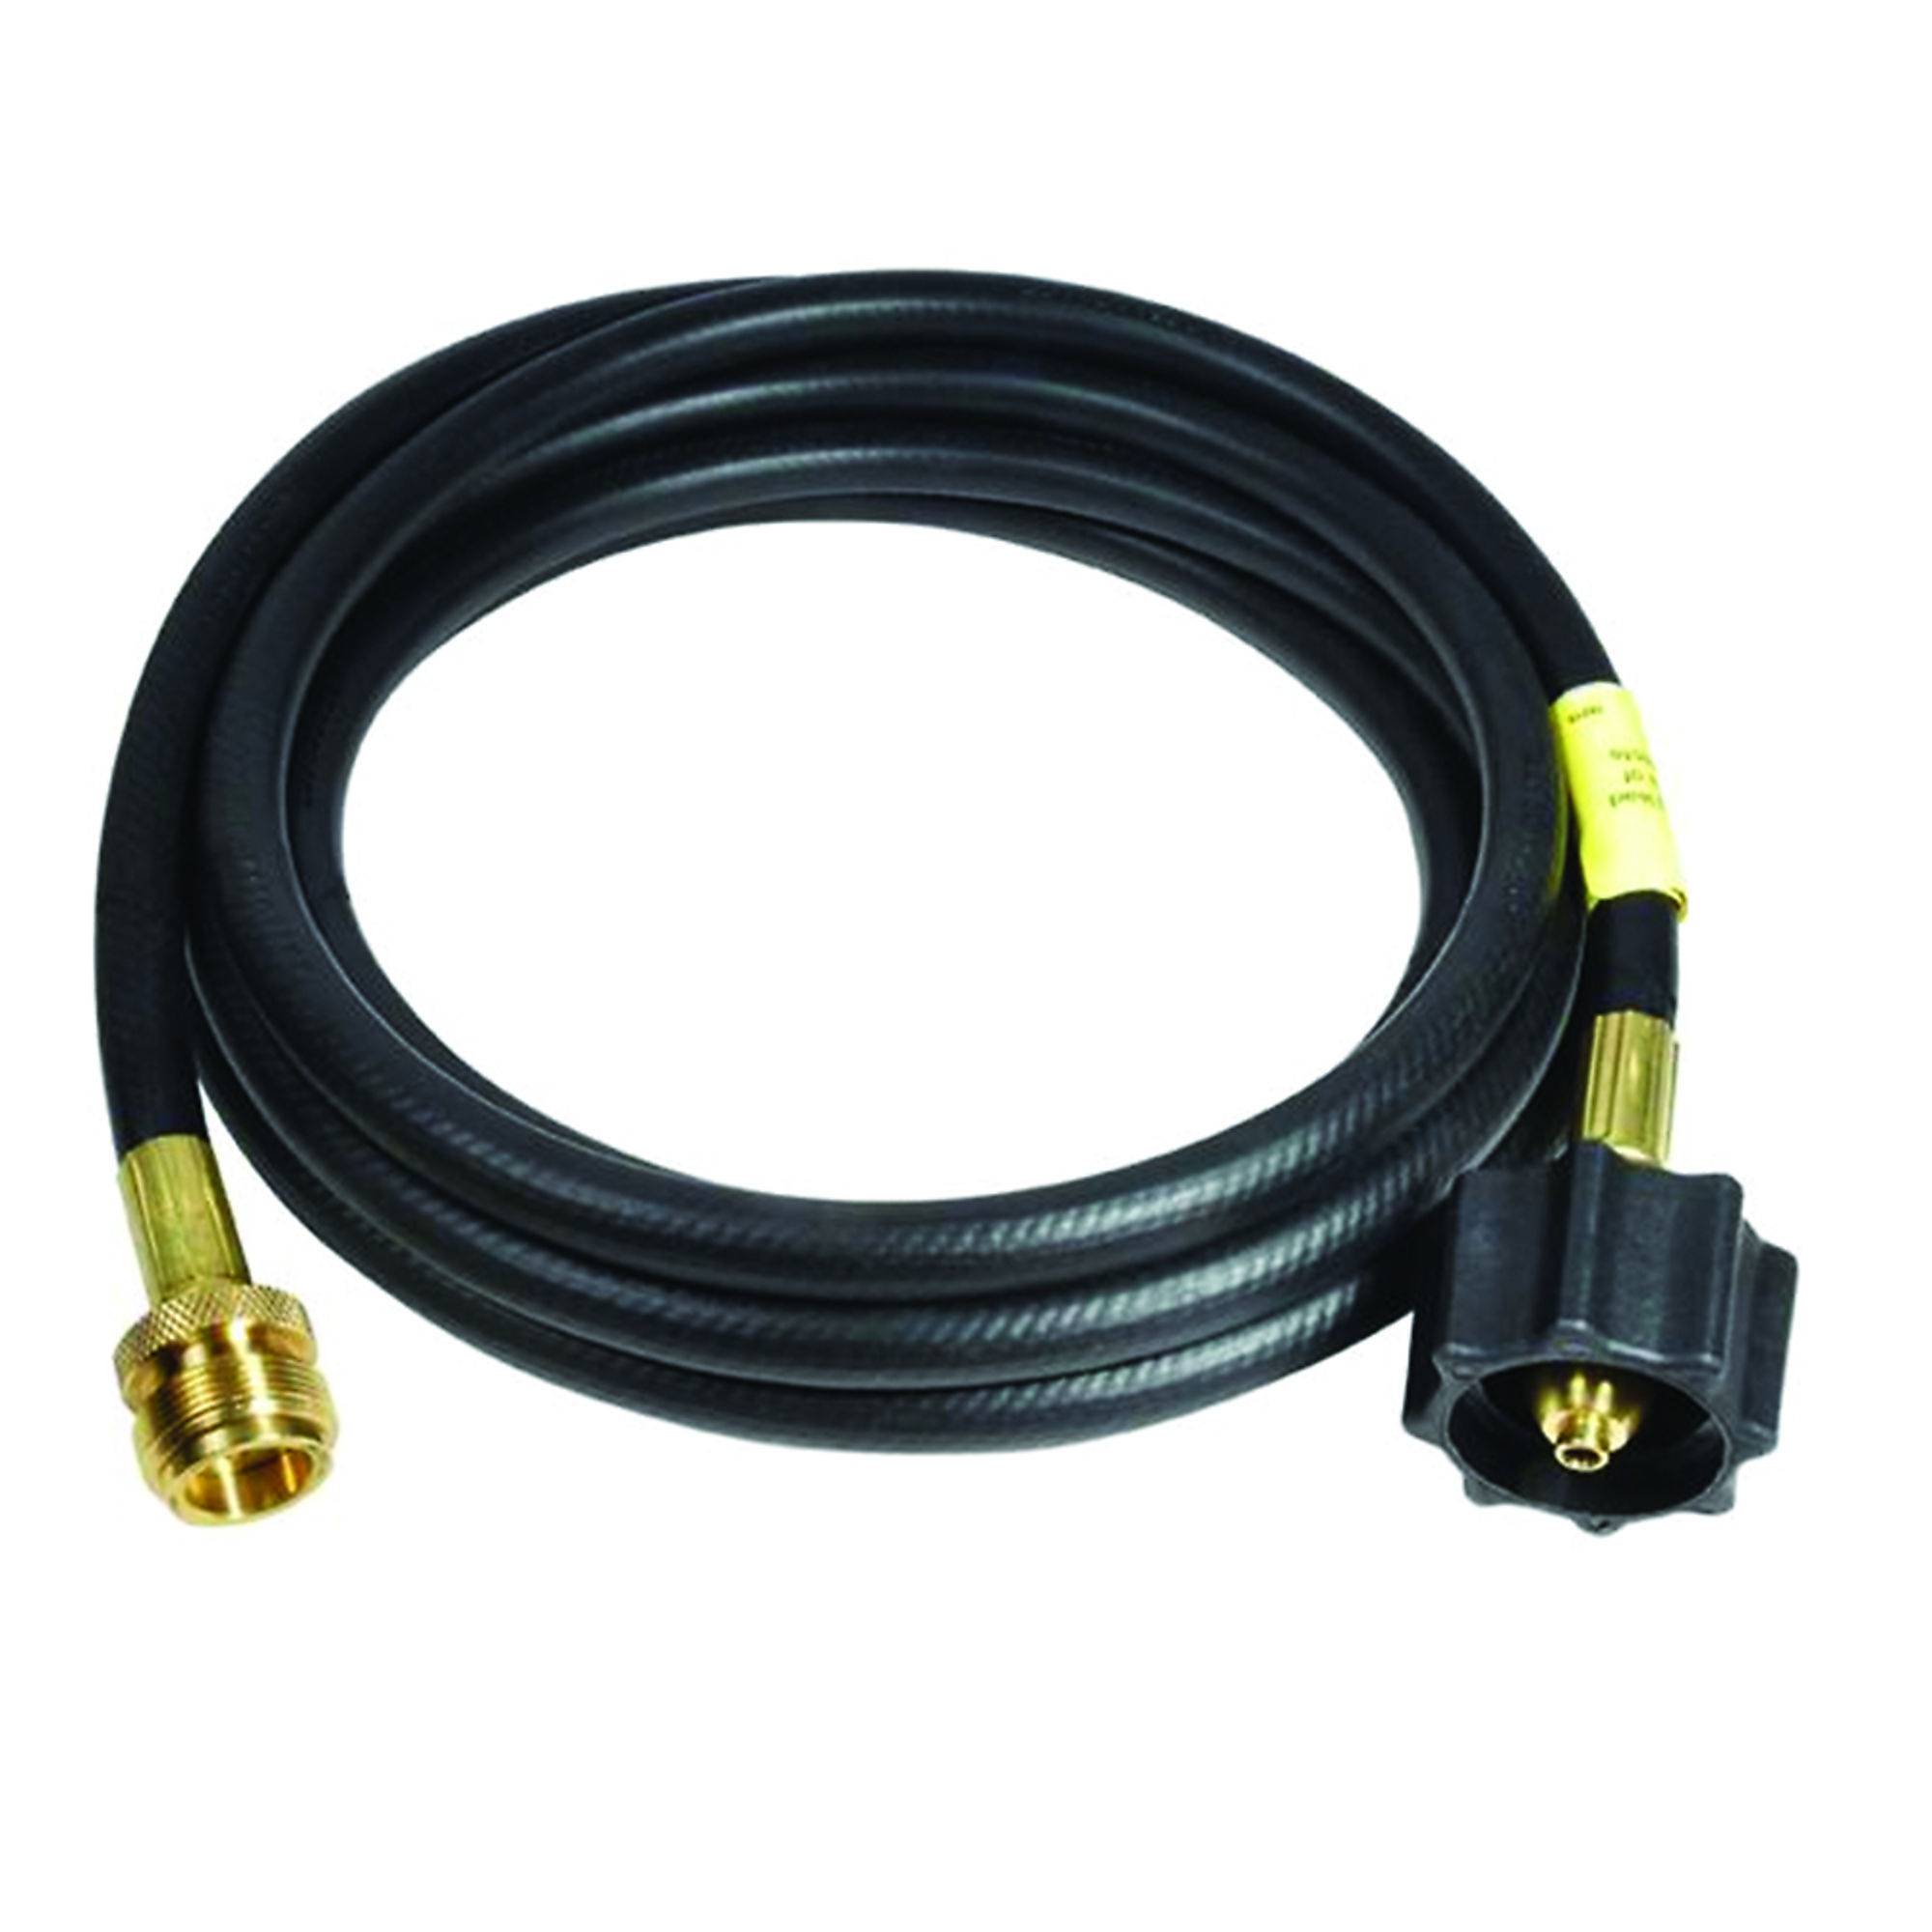 Mr. Heater, Propane Hose Assembly, Included (qty.) 1 Material Rubber, Compatible With 20 lb propane tanks, Model F273703-144